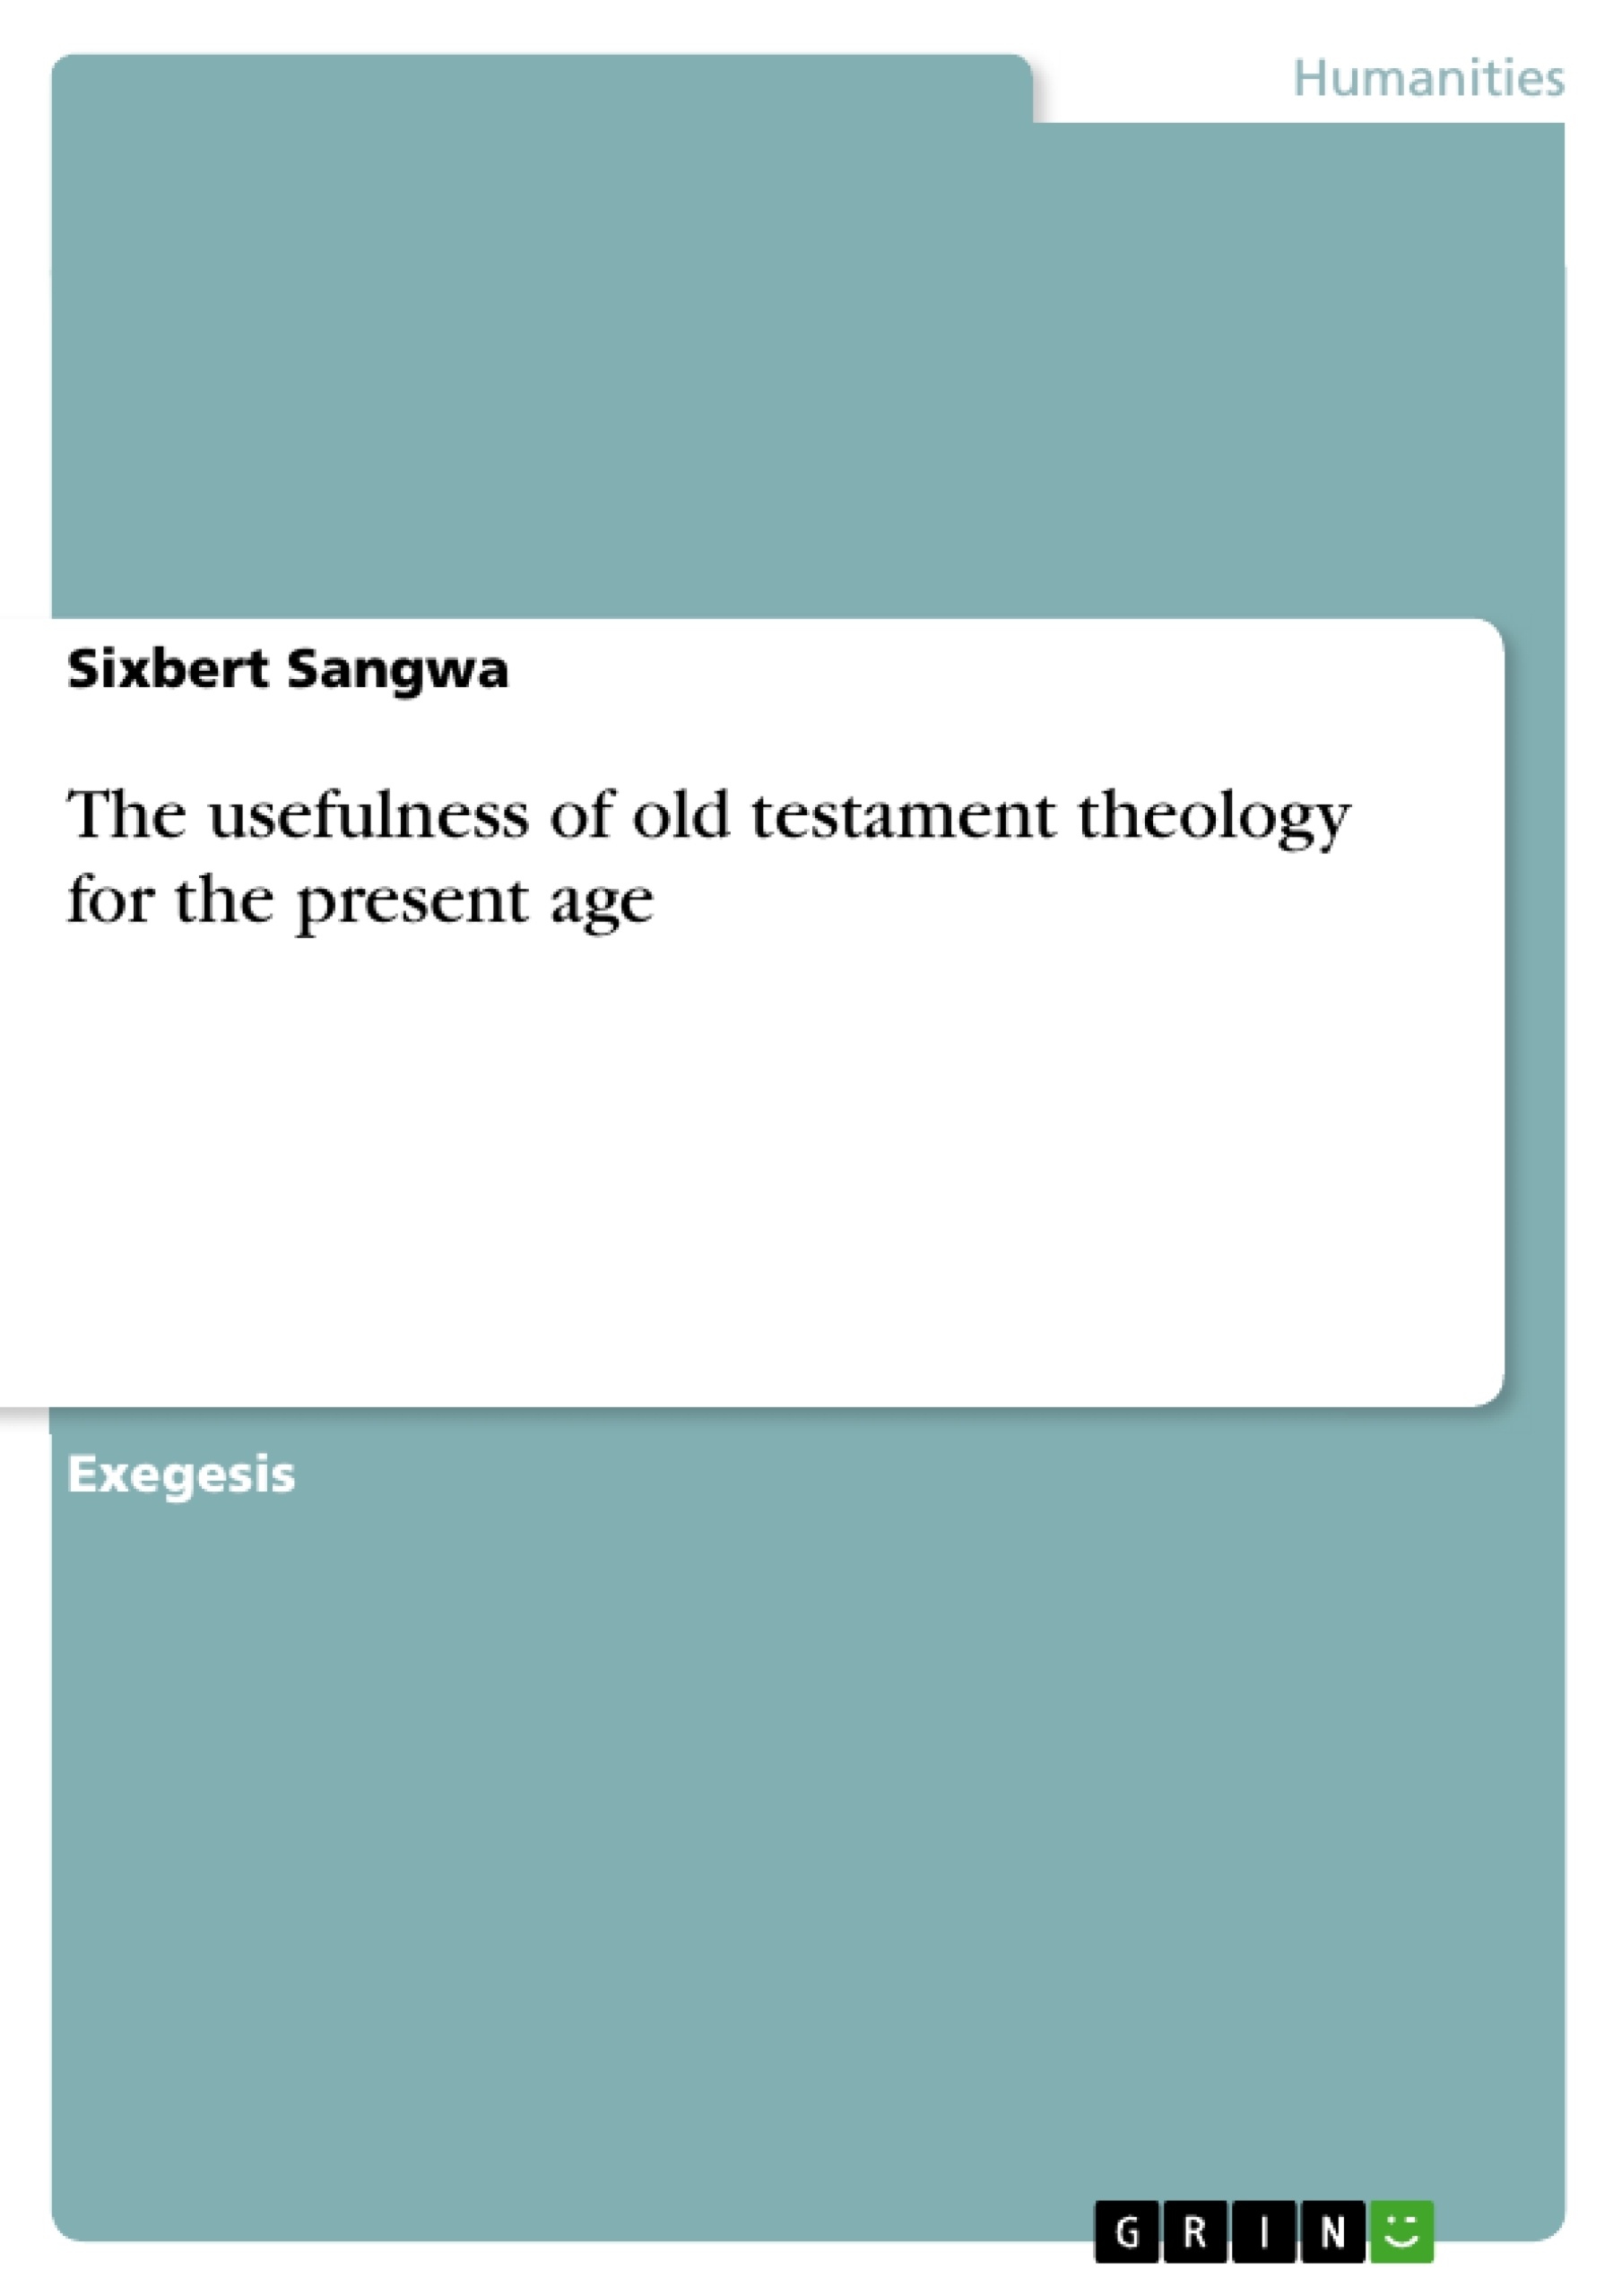 Title: The usefulness of old testament theology for the present age